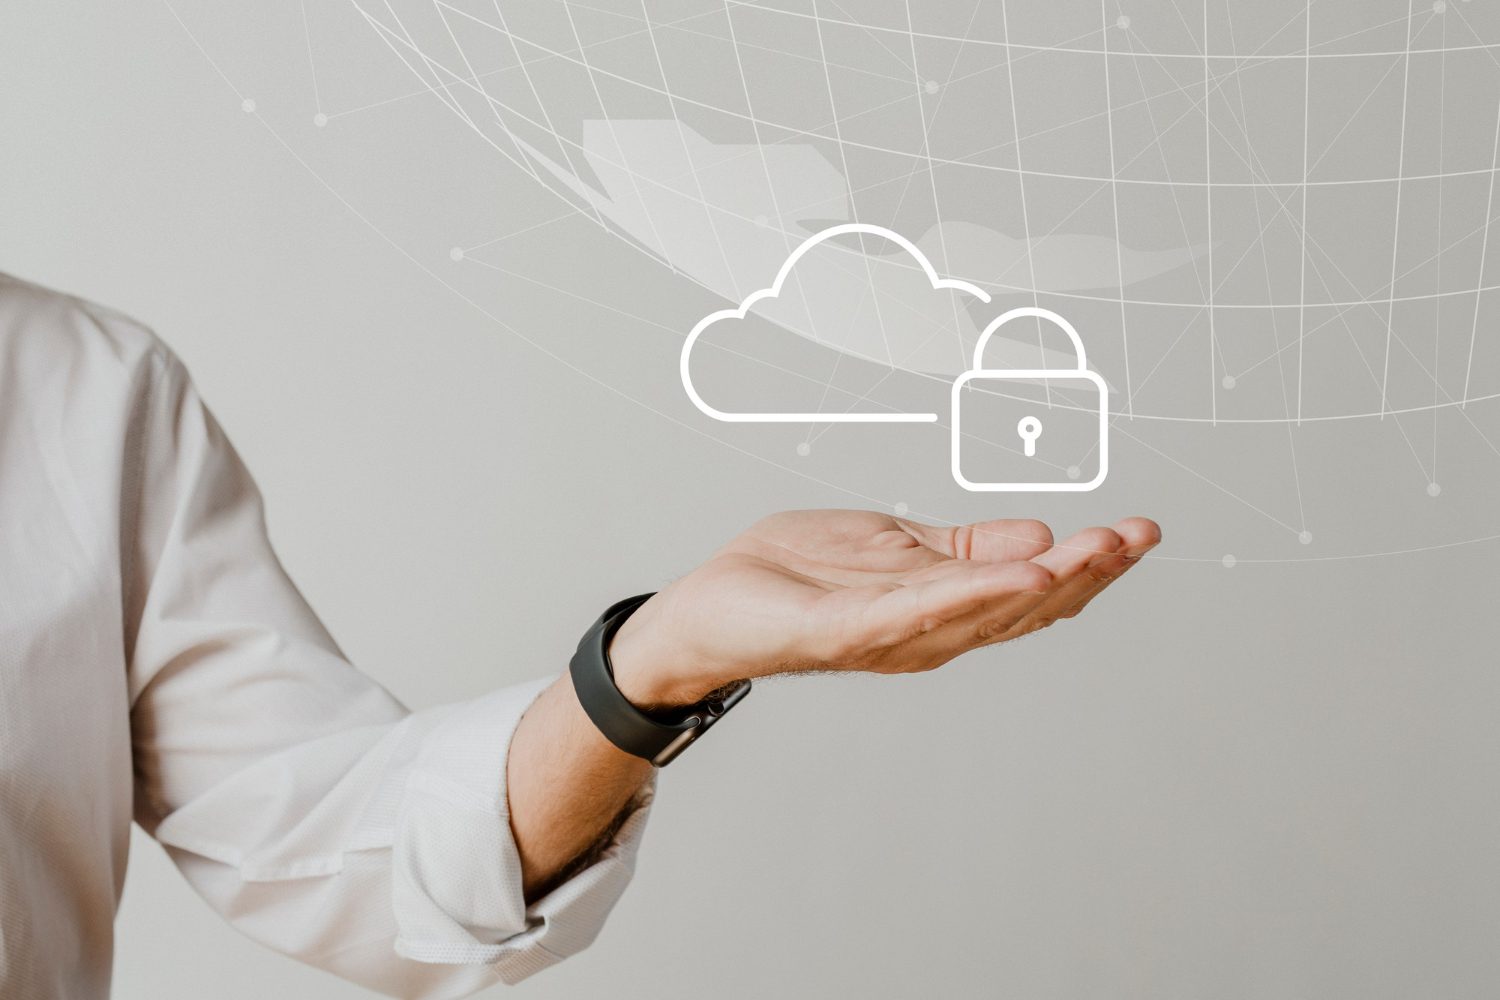 A person's hand is extended with a cloud symbol above it, representing secure cloud computing.